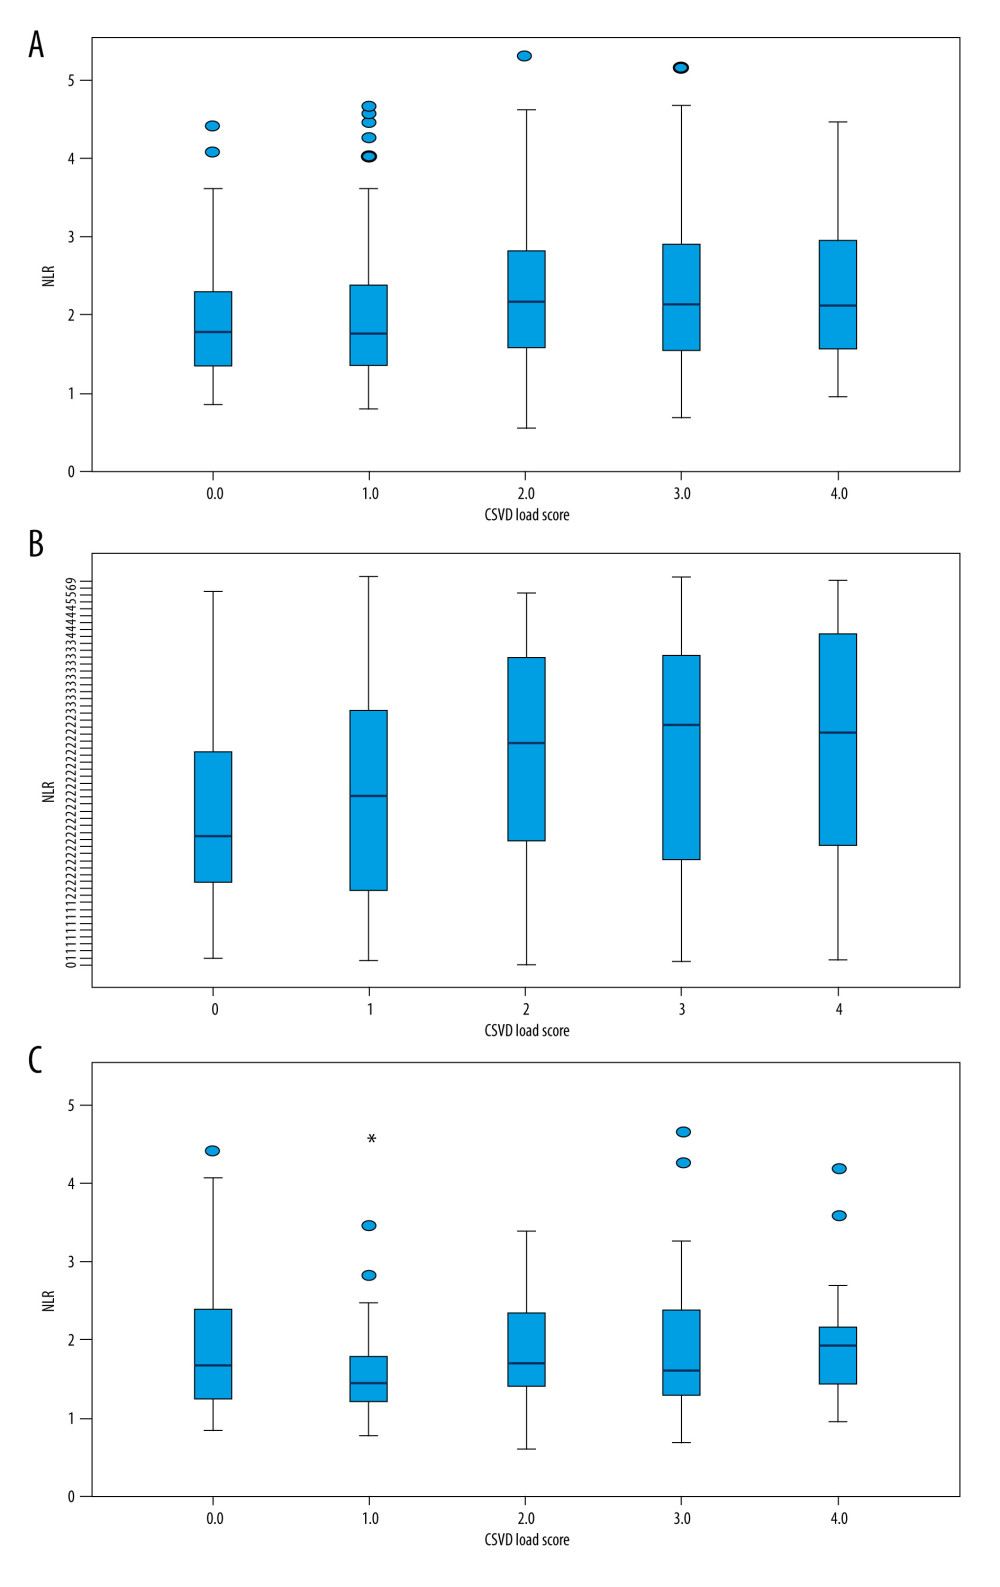 Relationship between NLR and the total load score of CSVD. (A) Comparison of NLR among CSVD load score groups, P=0.009; (B) Comparison of NLR among load score groups in males, P=0.002; (C) Comparison of NLR among load score groups in females, P=0.354.